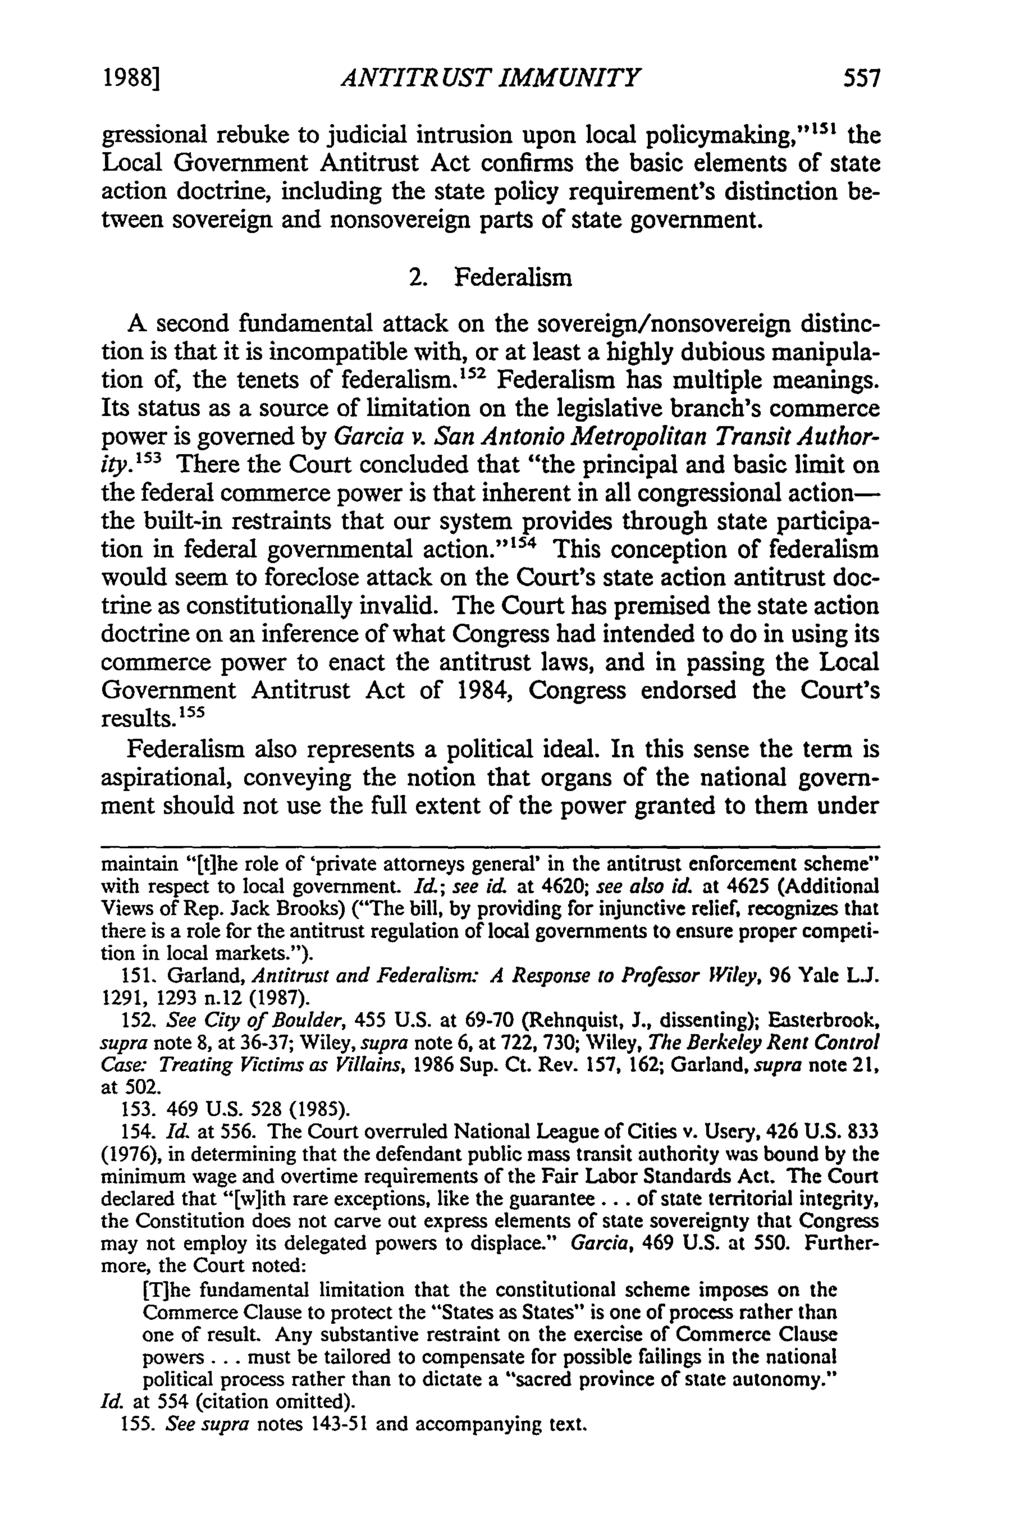 1988] ANTITR UST IMMUNITY gressional rebuke to judicial intrusion upon local policymaking," '15 1 the Local Government Antitrust Act confirms the basic elements of state action doctrine, including